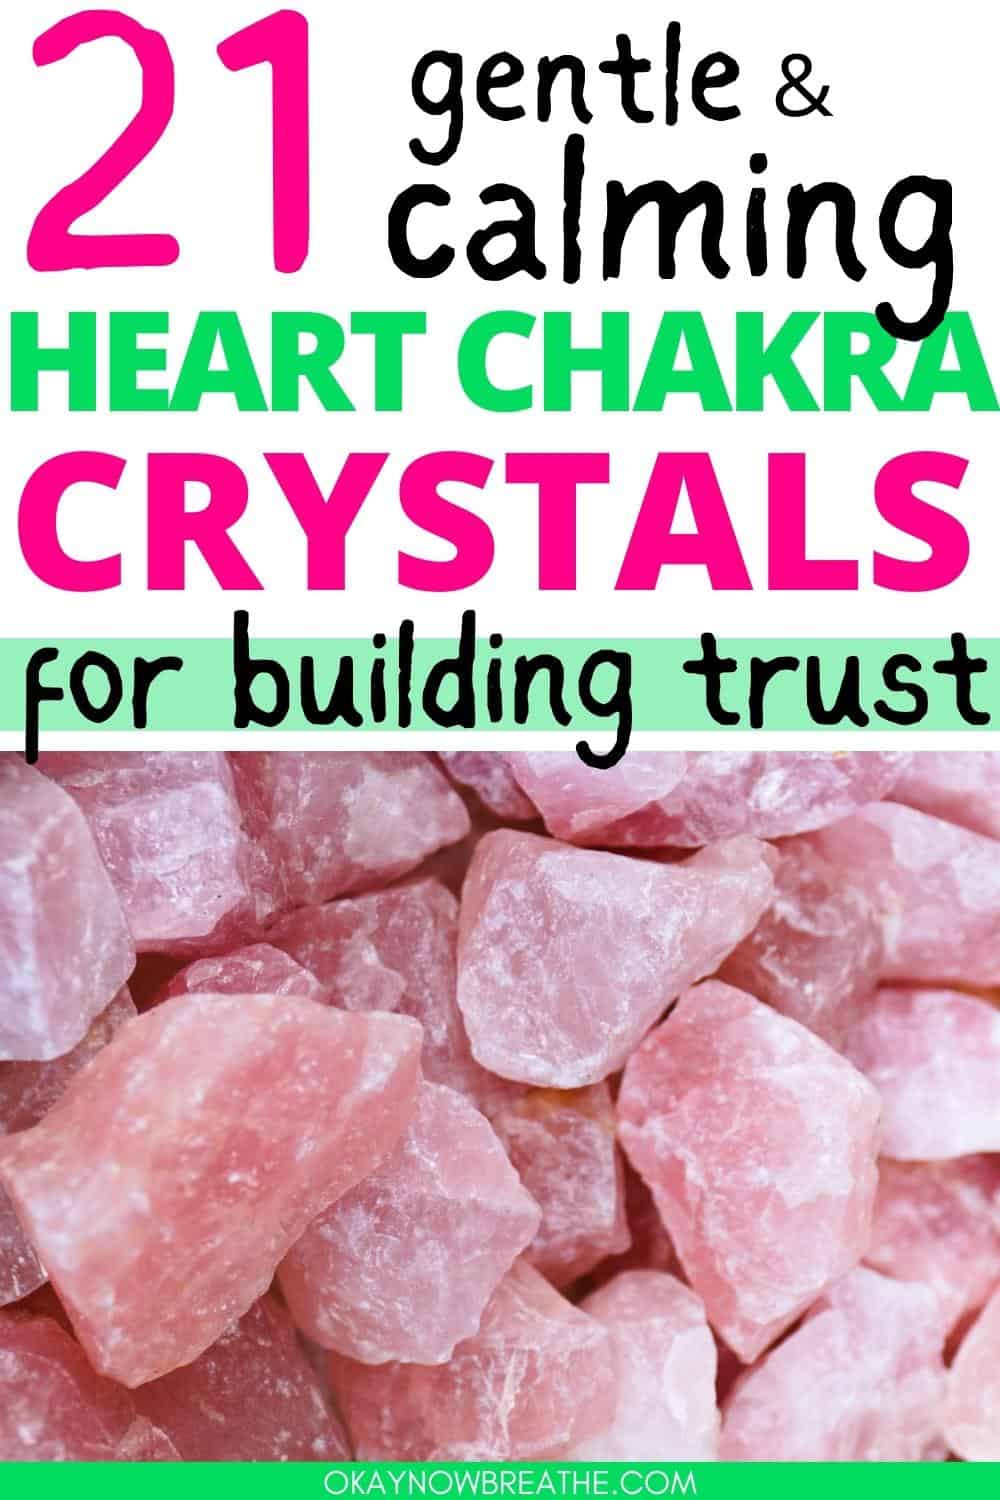 There is a picture filed with chunks of raw rose quartz. Above this image, there is text that says: 21 gentle & calming heart chakra crystals for building trust - okaynowbreathe.com